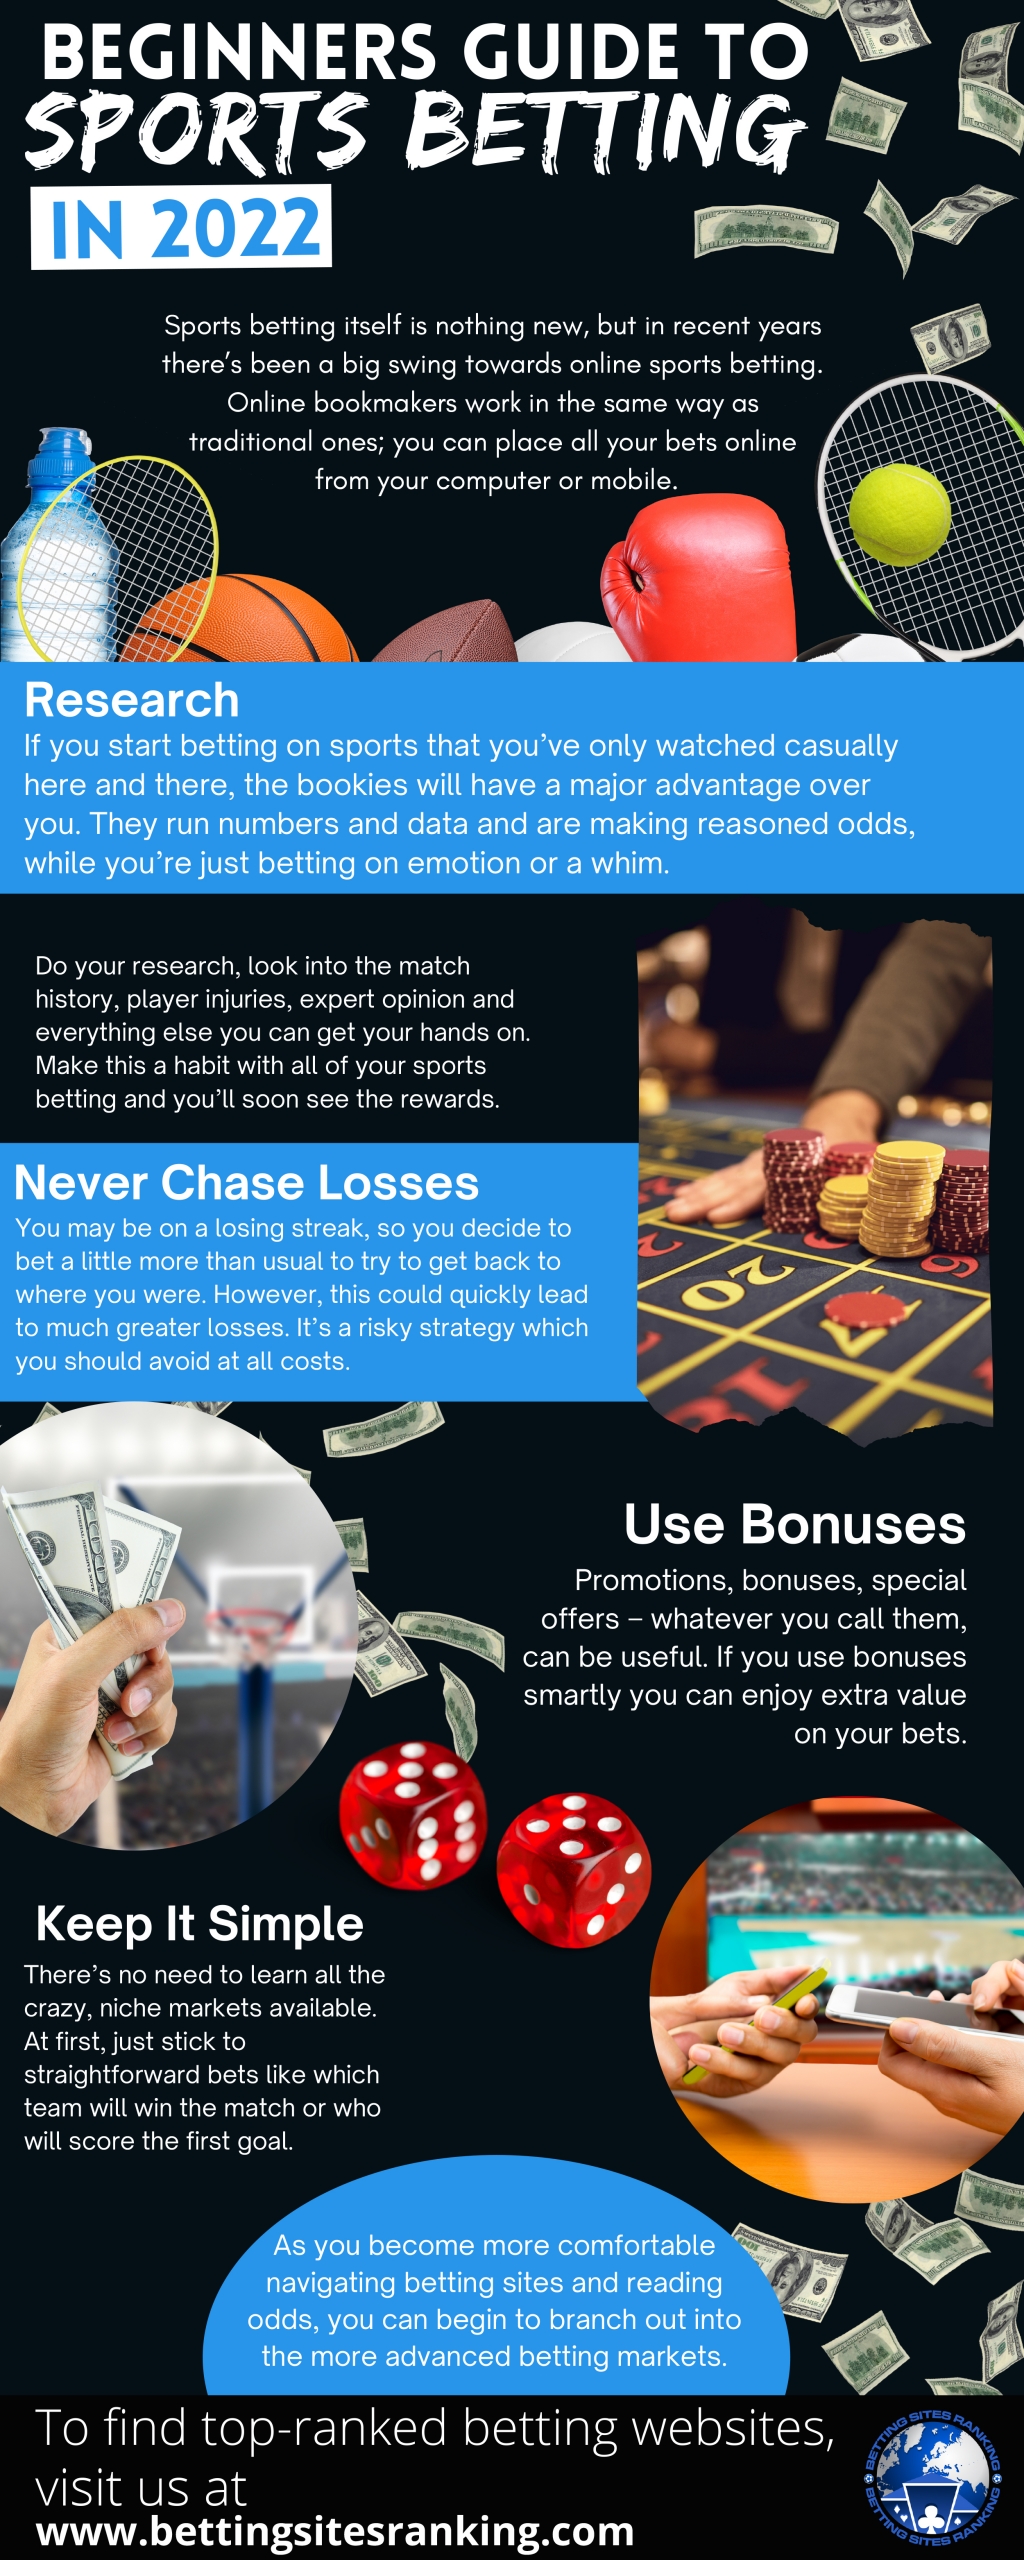 Beginners-Guide-to-Sports-Betting-in-2022